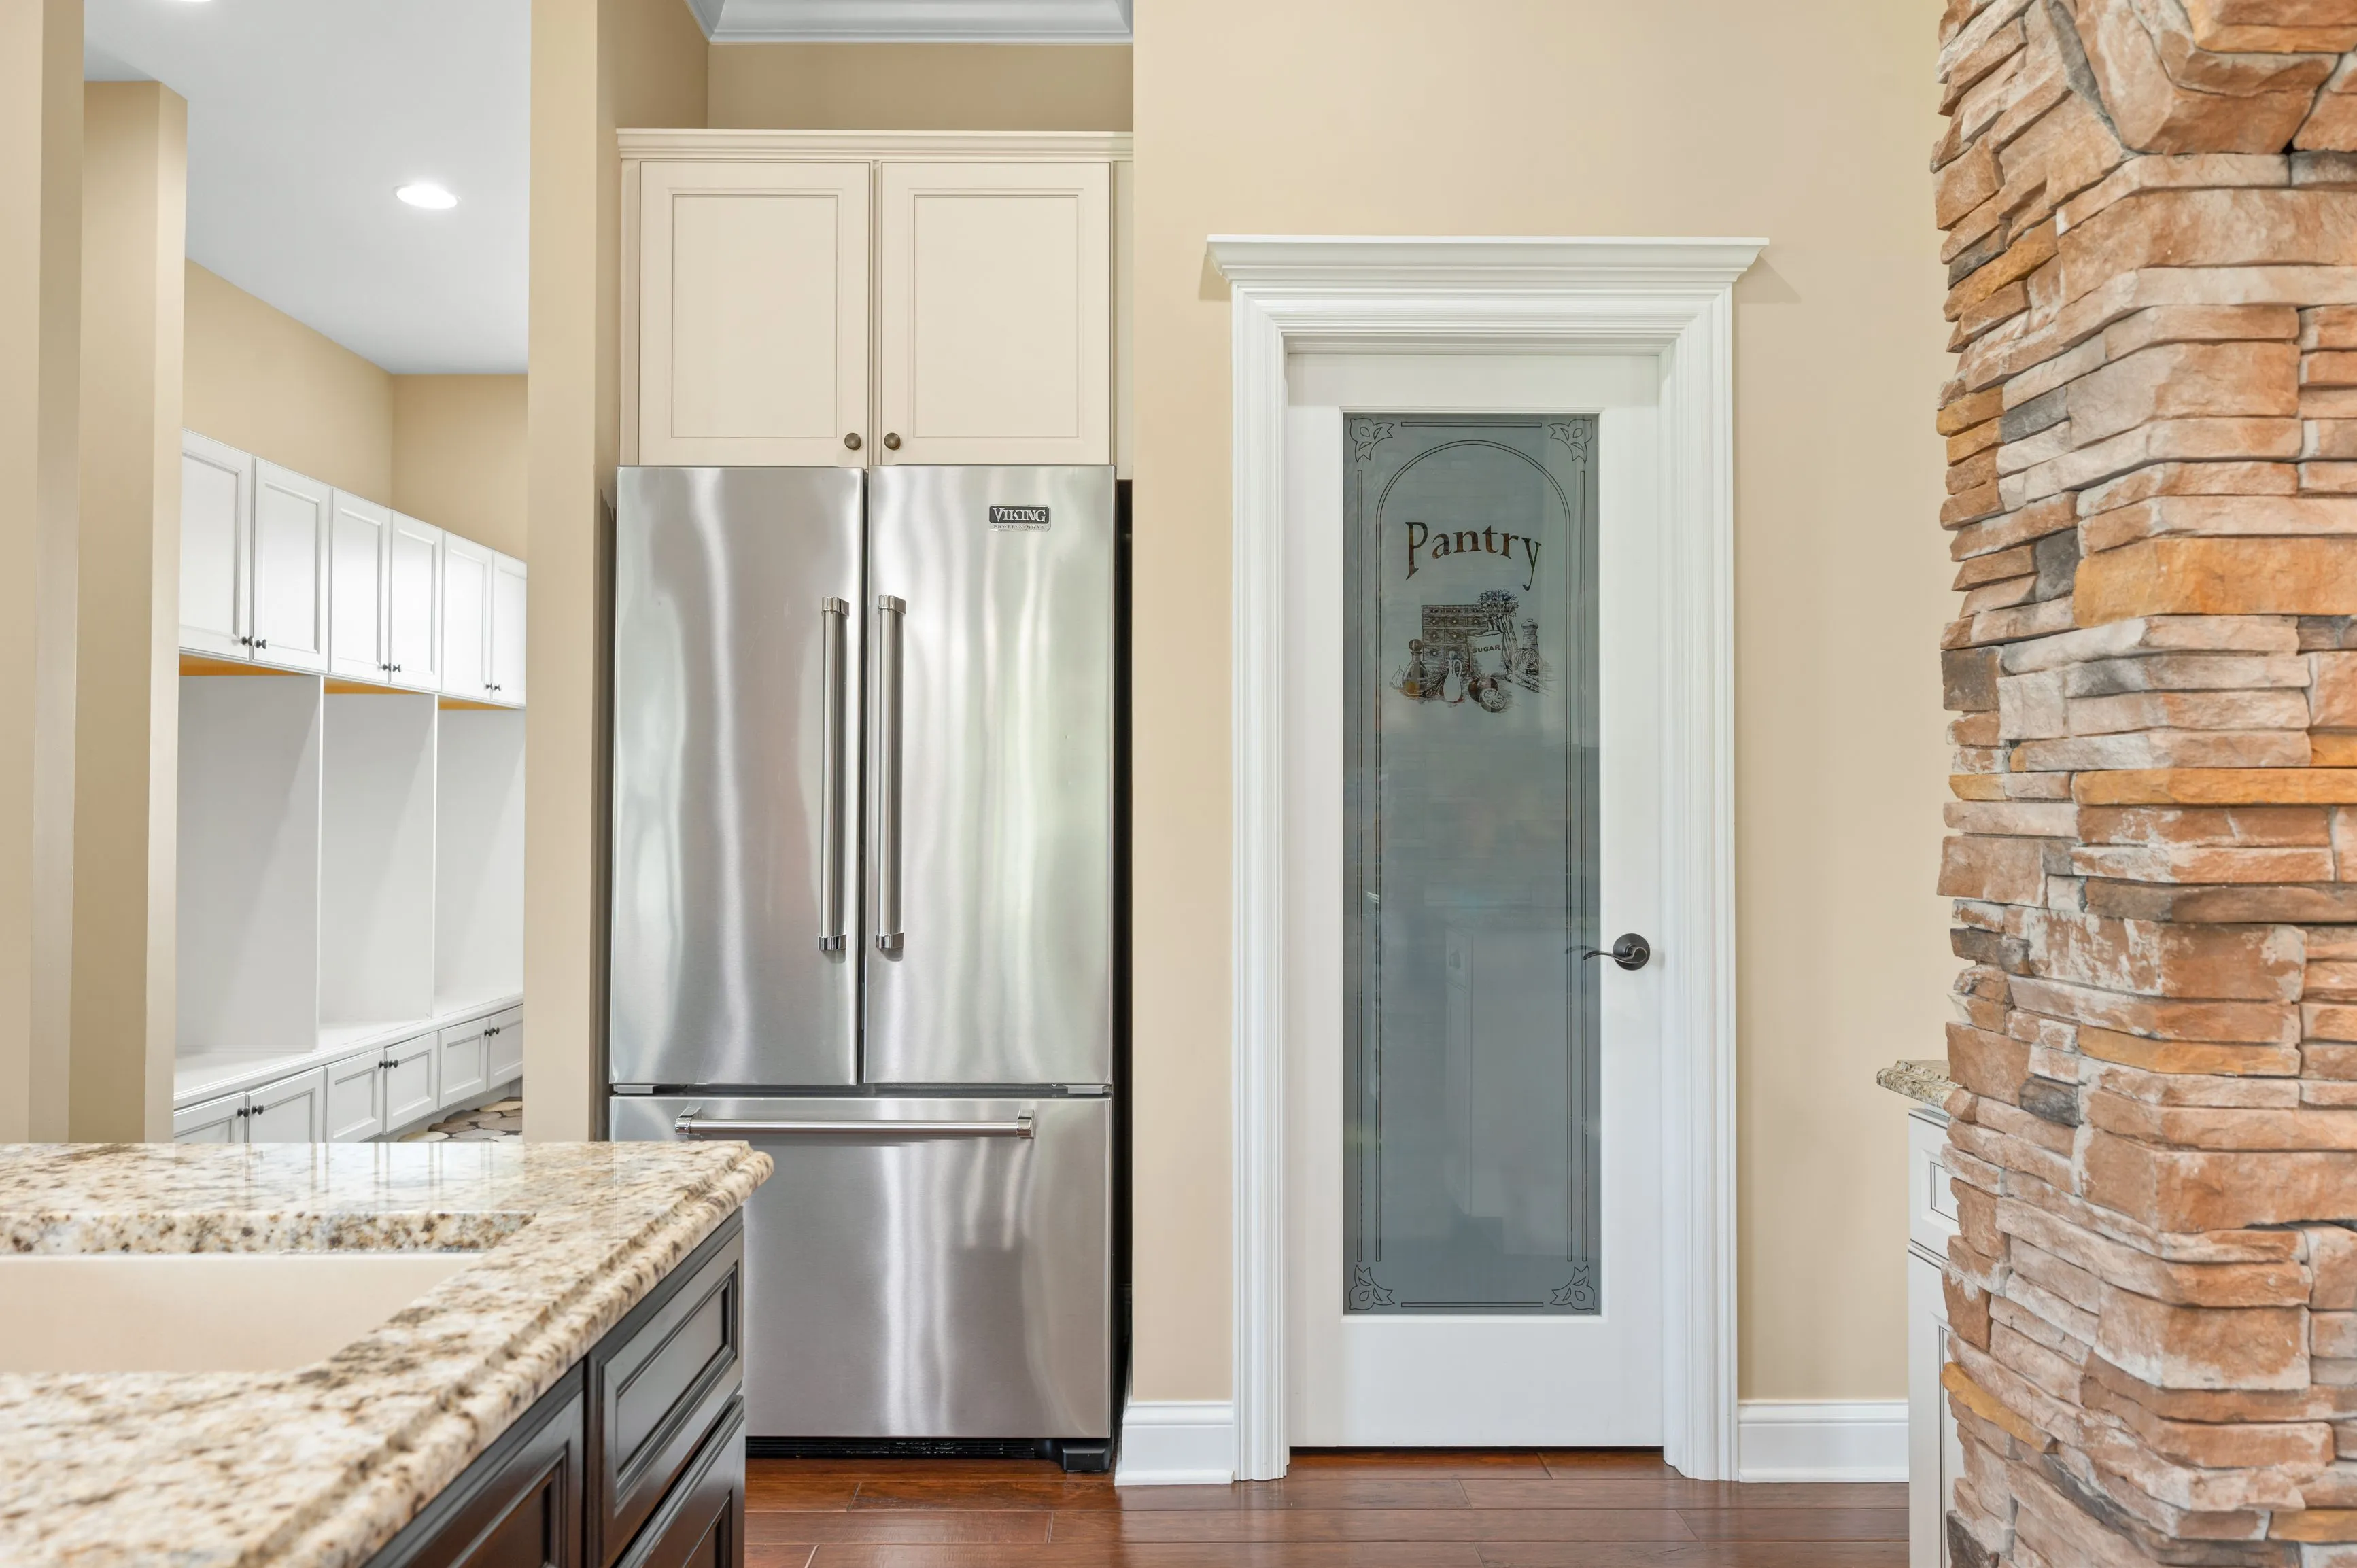 Modern kitchen interior with stainless steel refrigerator next to a white pantry door and stone column.